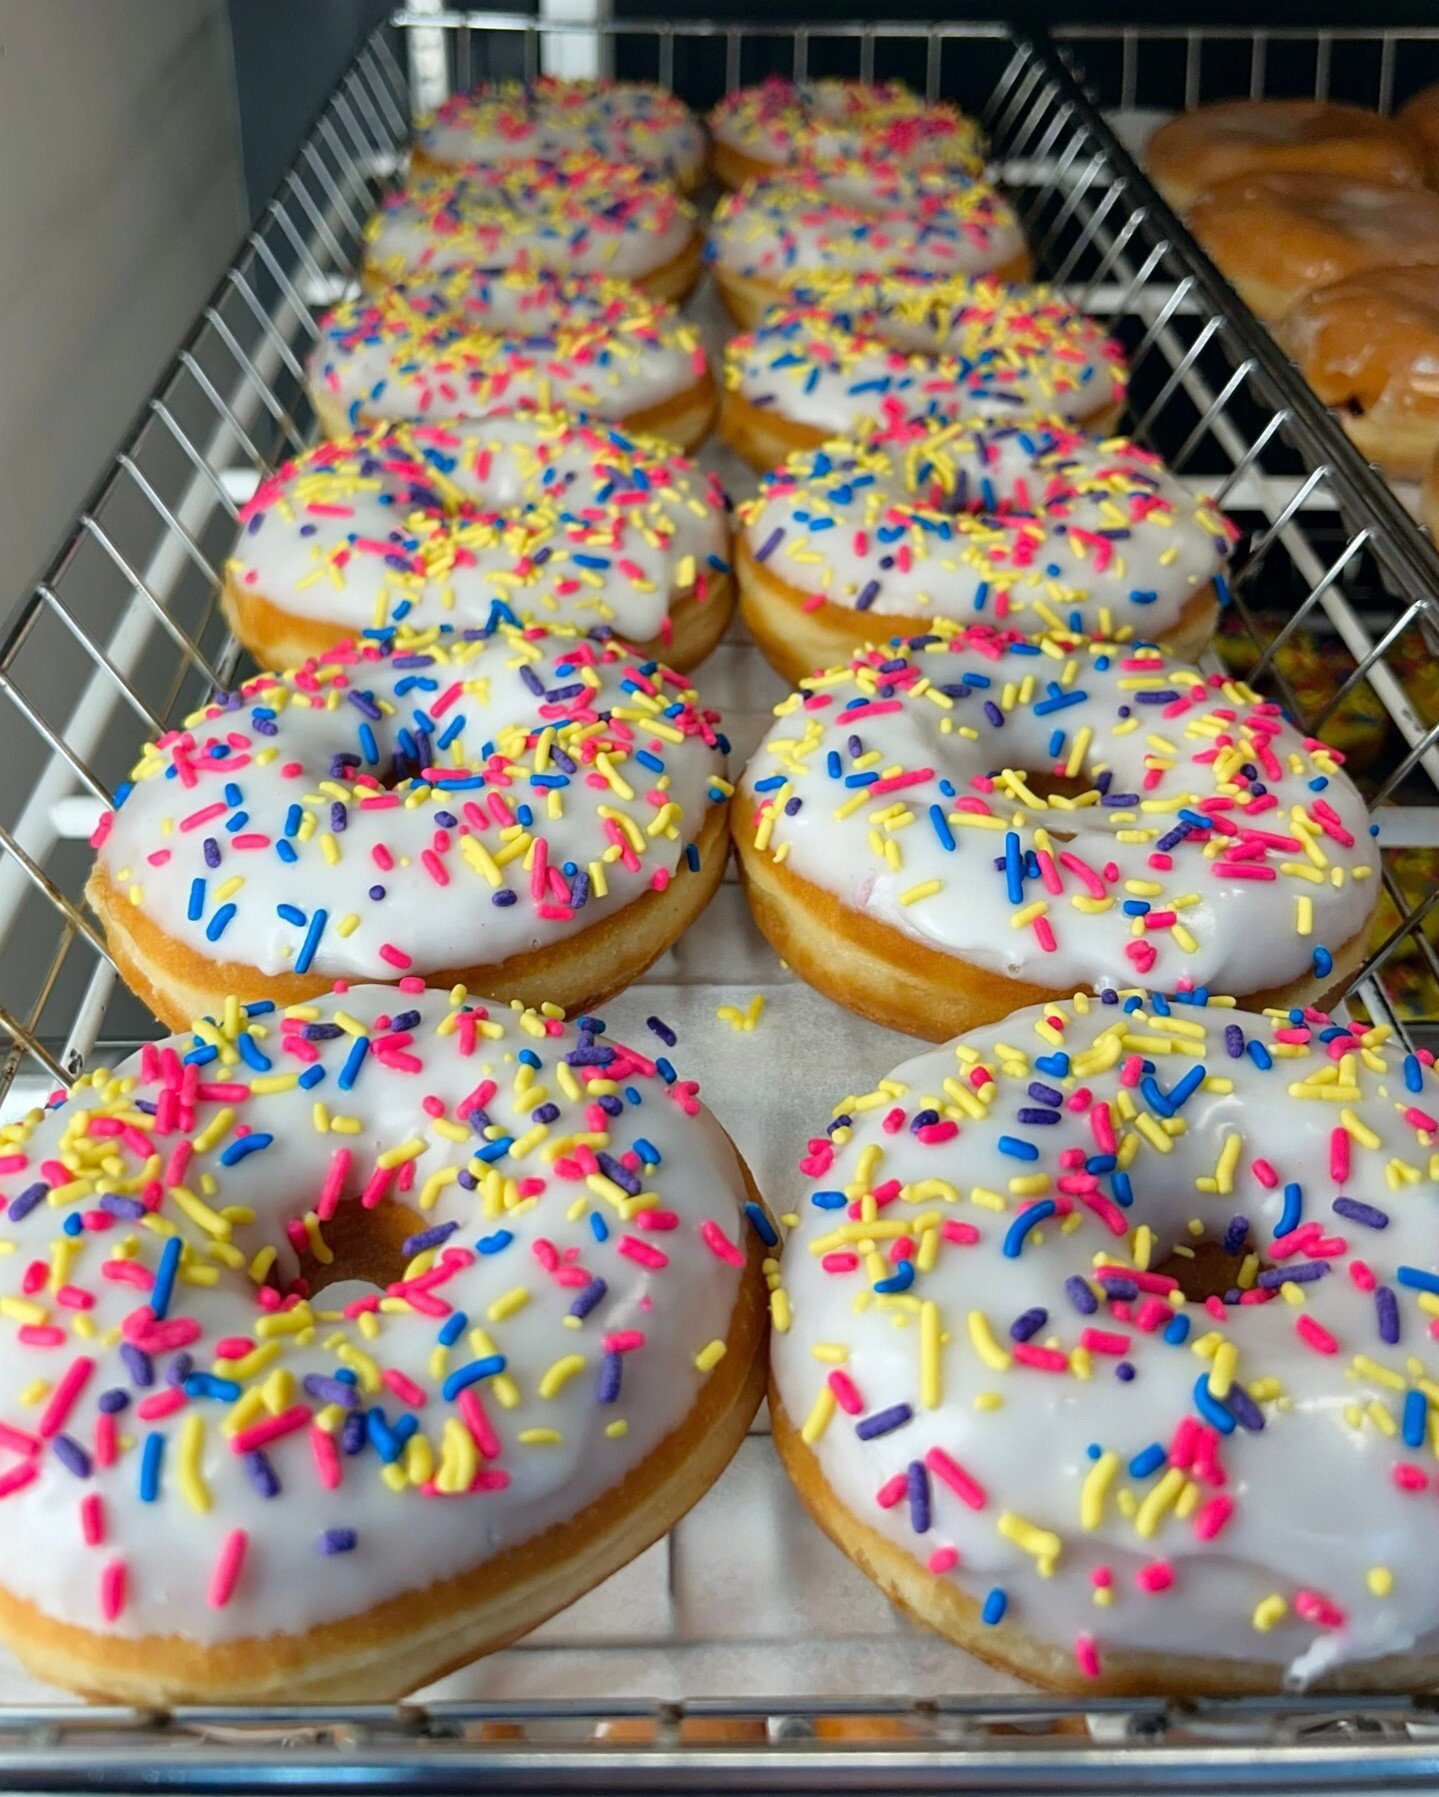 🐰🍩🎉 Happy Easter from Glenn Wayne Bakery! Swing by this weekend to pick up a dozen of your favorite donuts for your Easter celebrations.

Easter Hours:
- Saturday, March 30th: 7 AM - 6 PM (no happy hour)
- Easter Sunday, March 31st: 7 AM - 1 PM (n